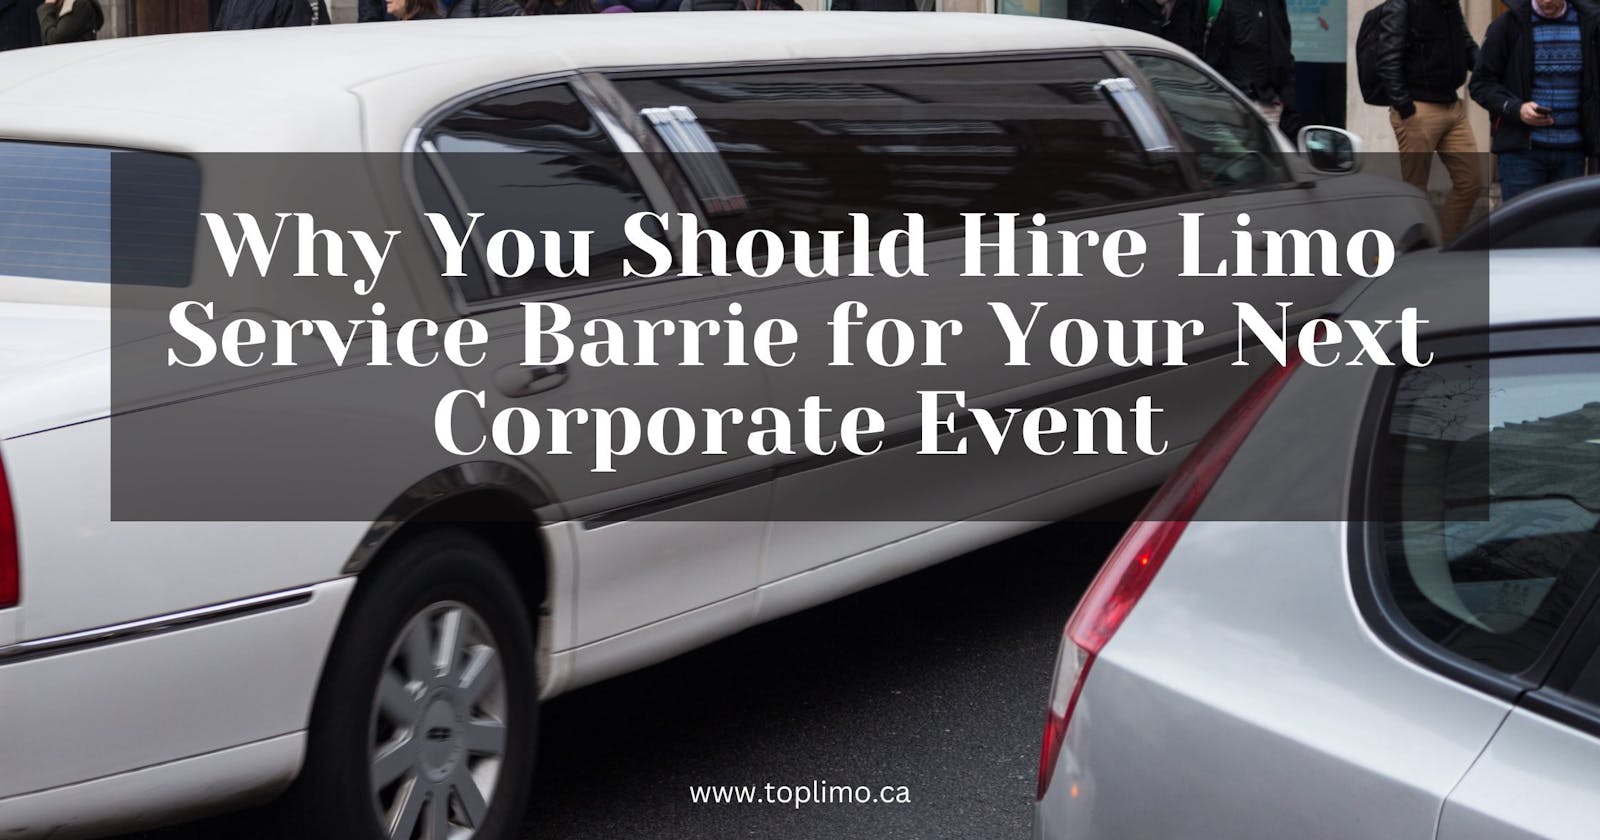 Why You Should Hire Limo Service Barrie for Your Next Corporate Event